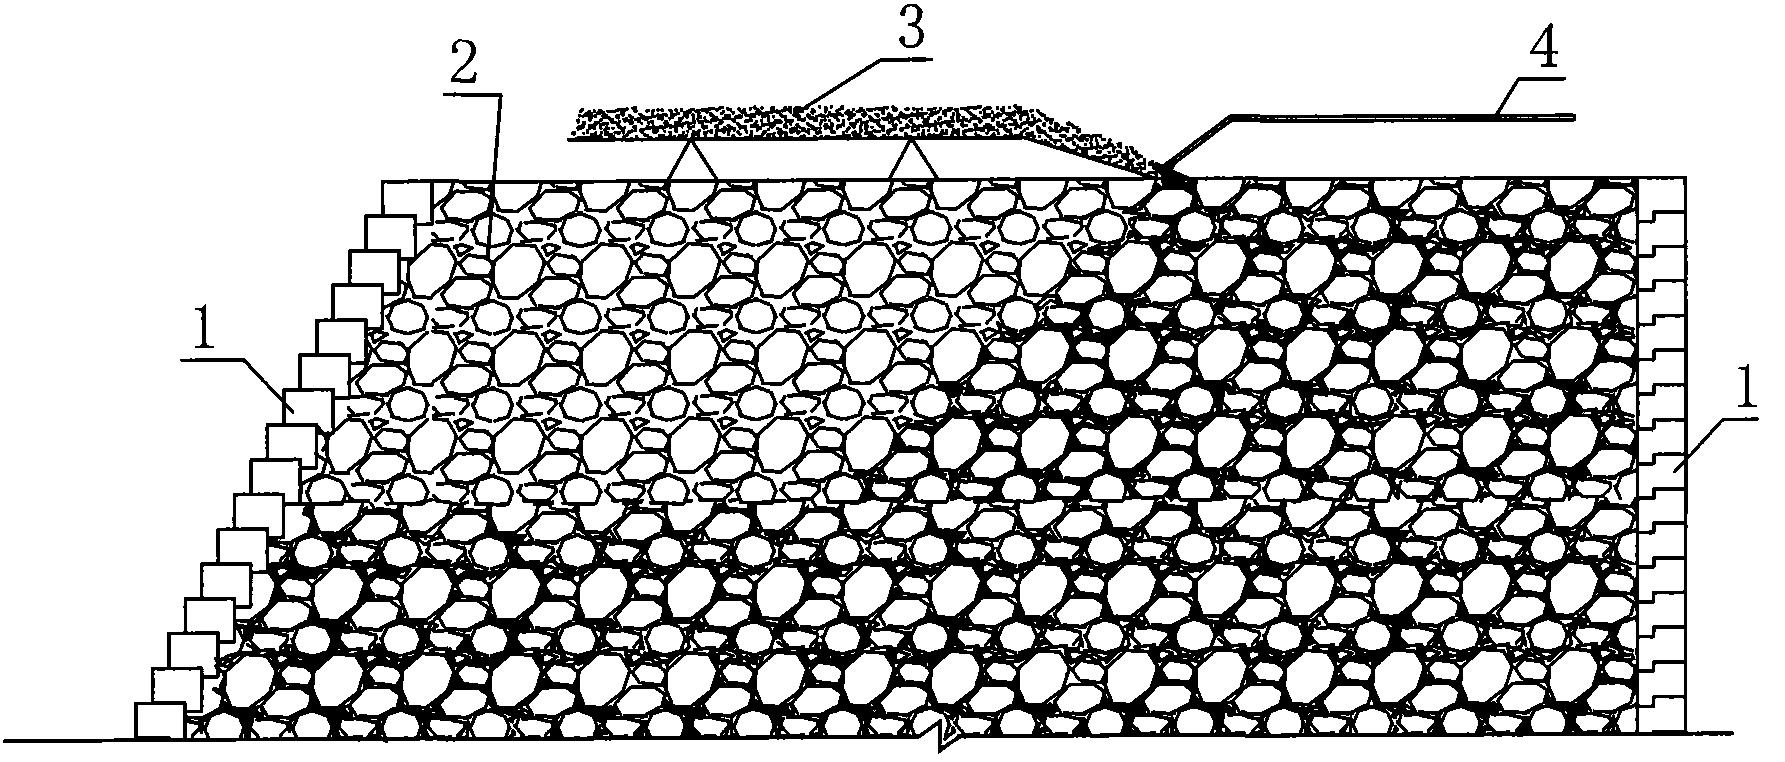 Construction method for filling mortar combined stone dam